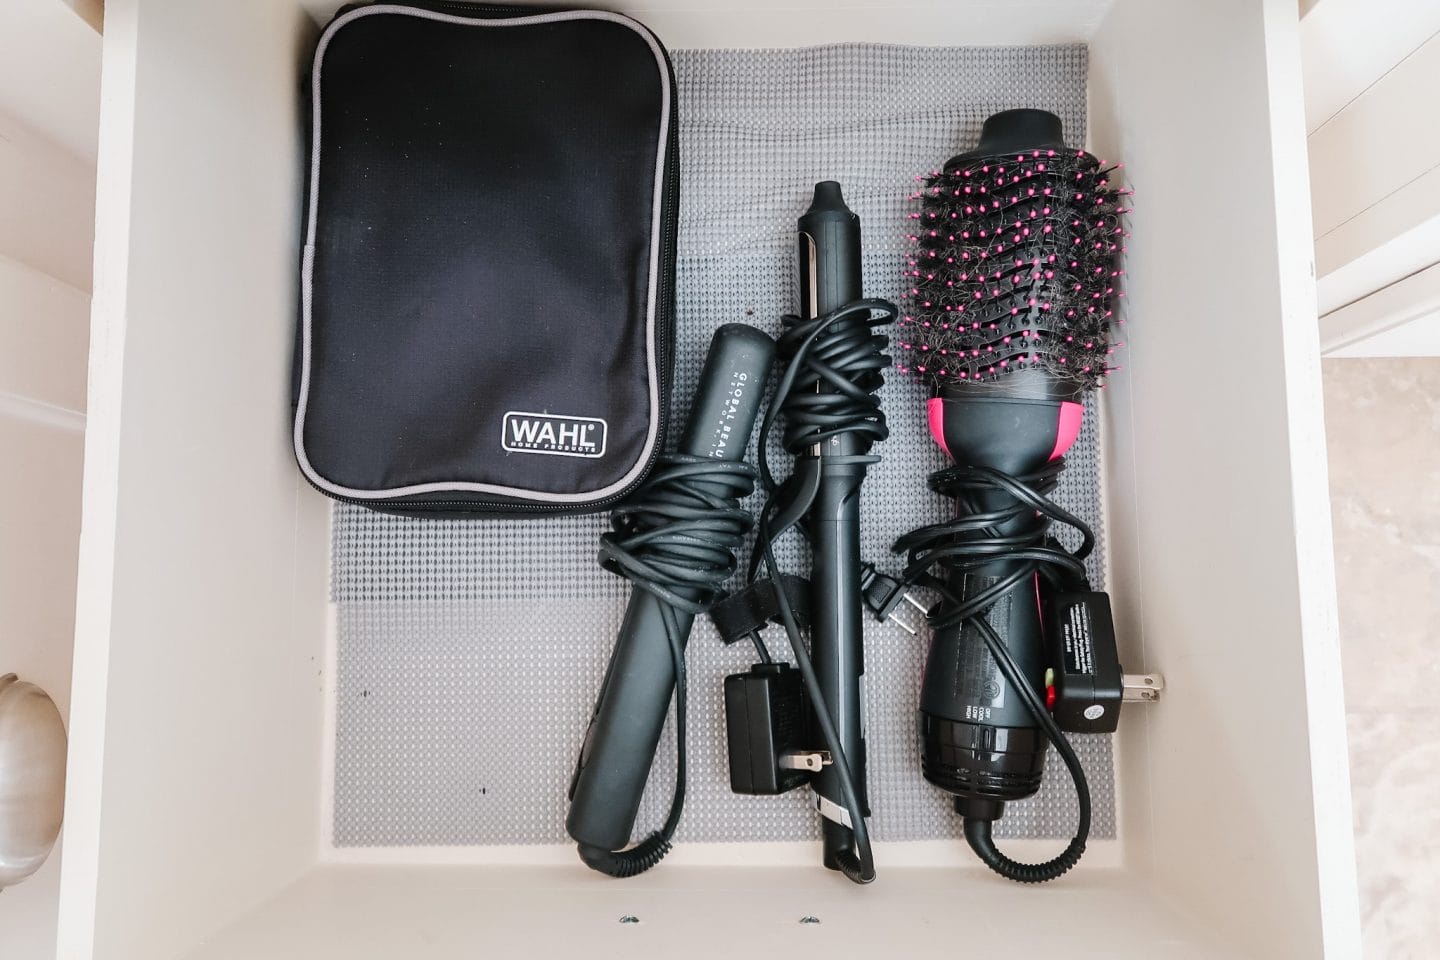 Hair Clippers, Chi Straightener, GHD Curling Wand, Revlon Hair Dryer Brush